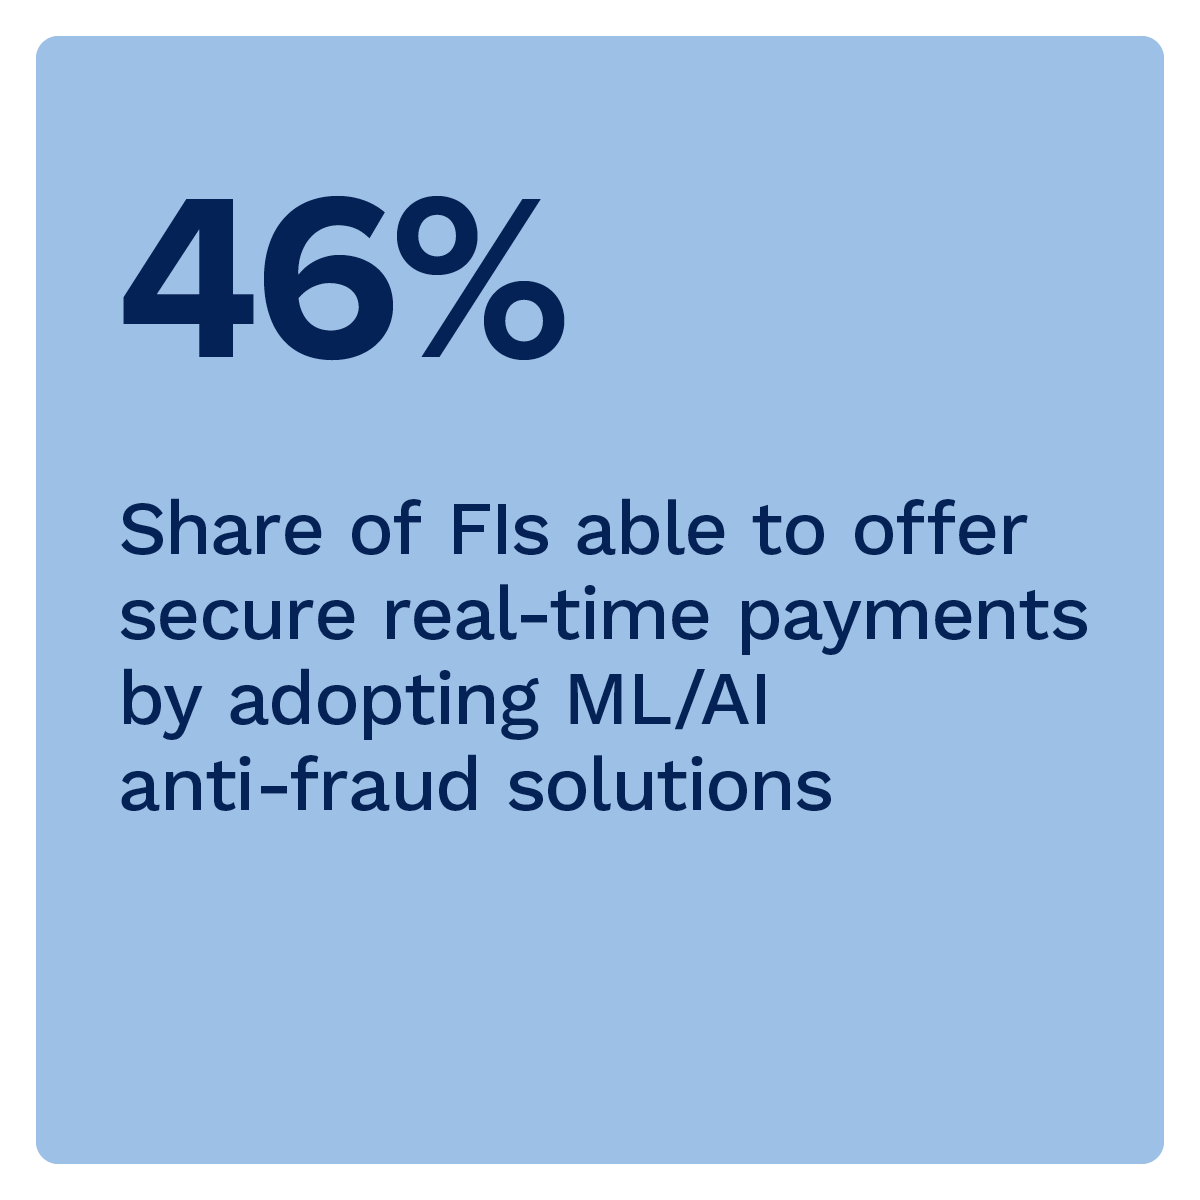 46%: Share of FIs able to offer secure real-time payments by adopting ML/AI anti-fraud solutions